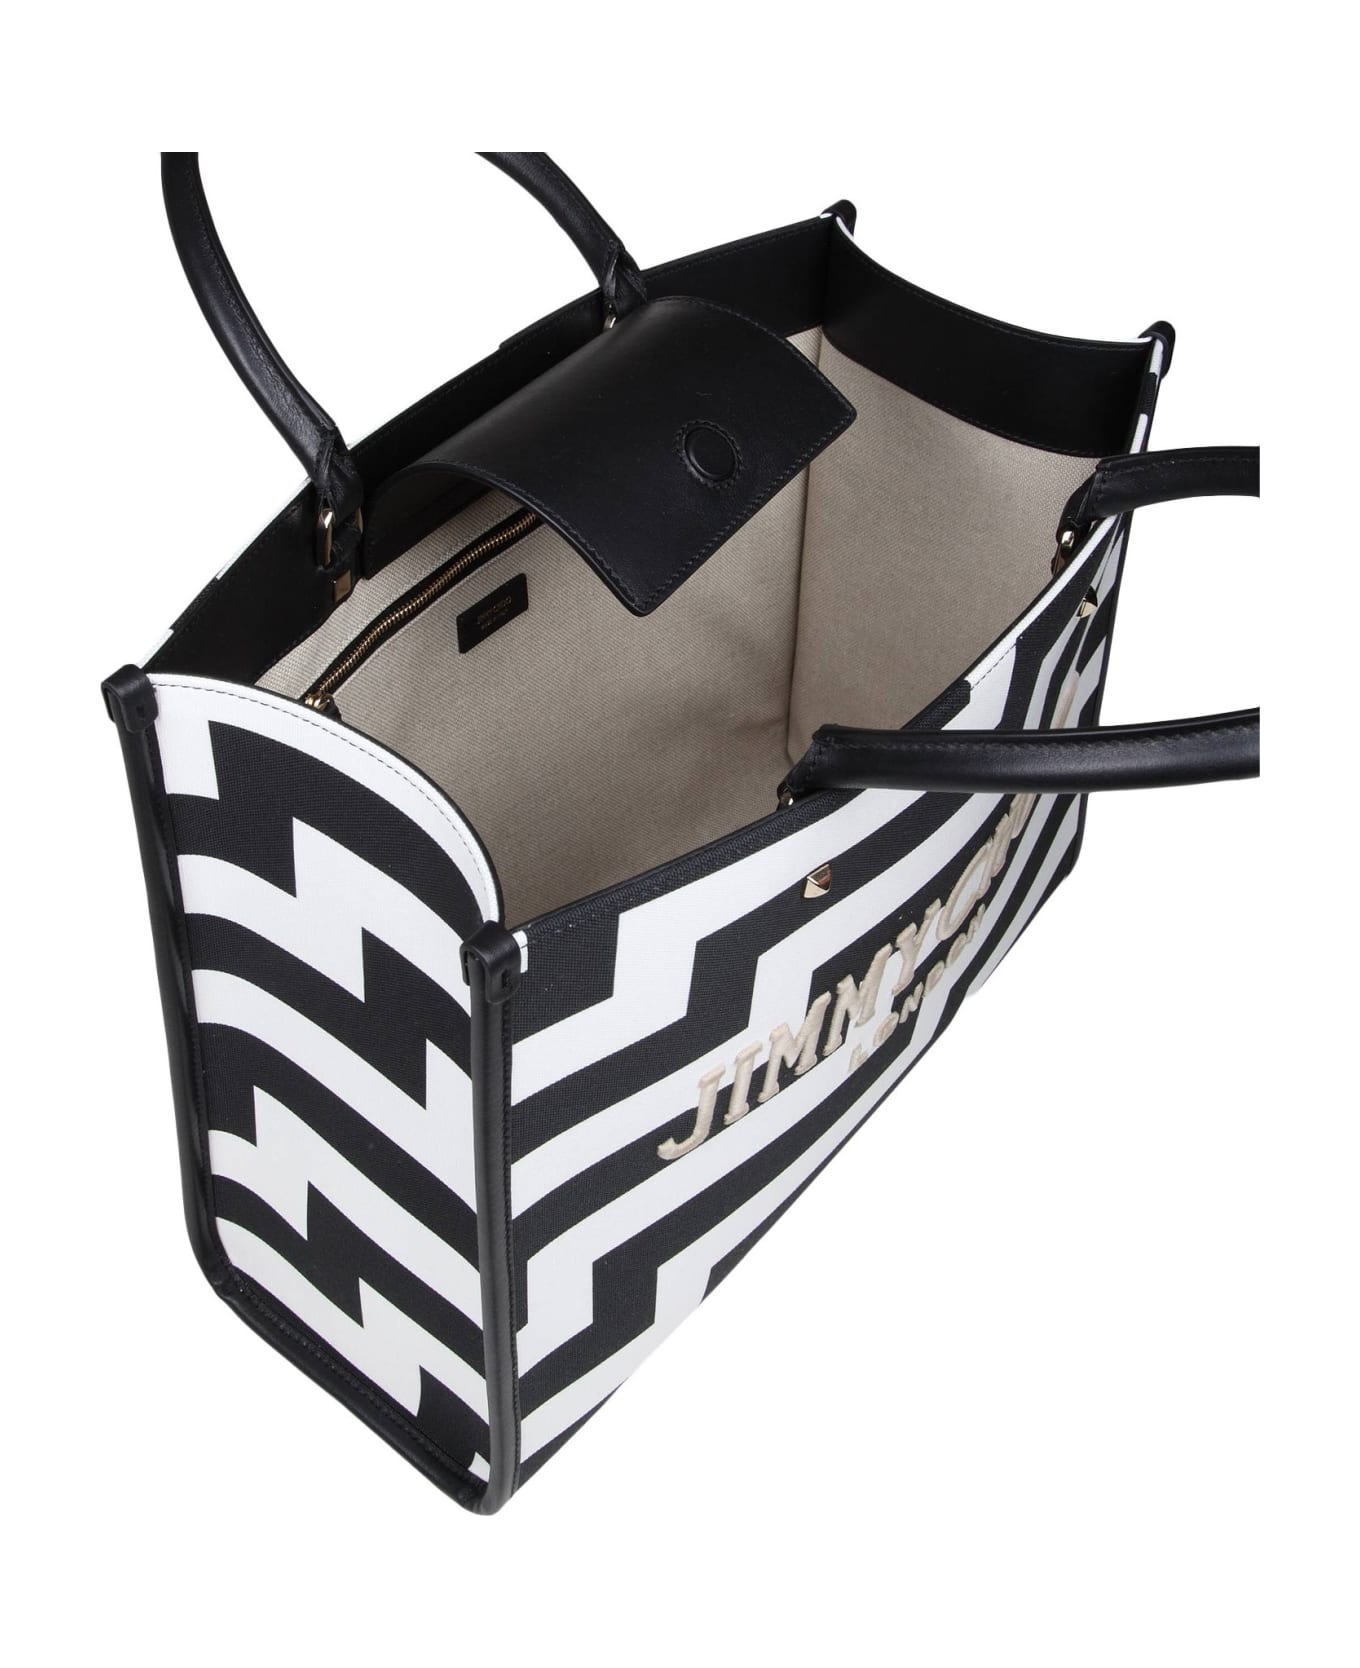 Jimmy Choo Avenue M Black And White Canvas And Leather Tote - Black/White